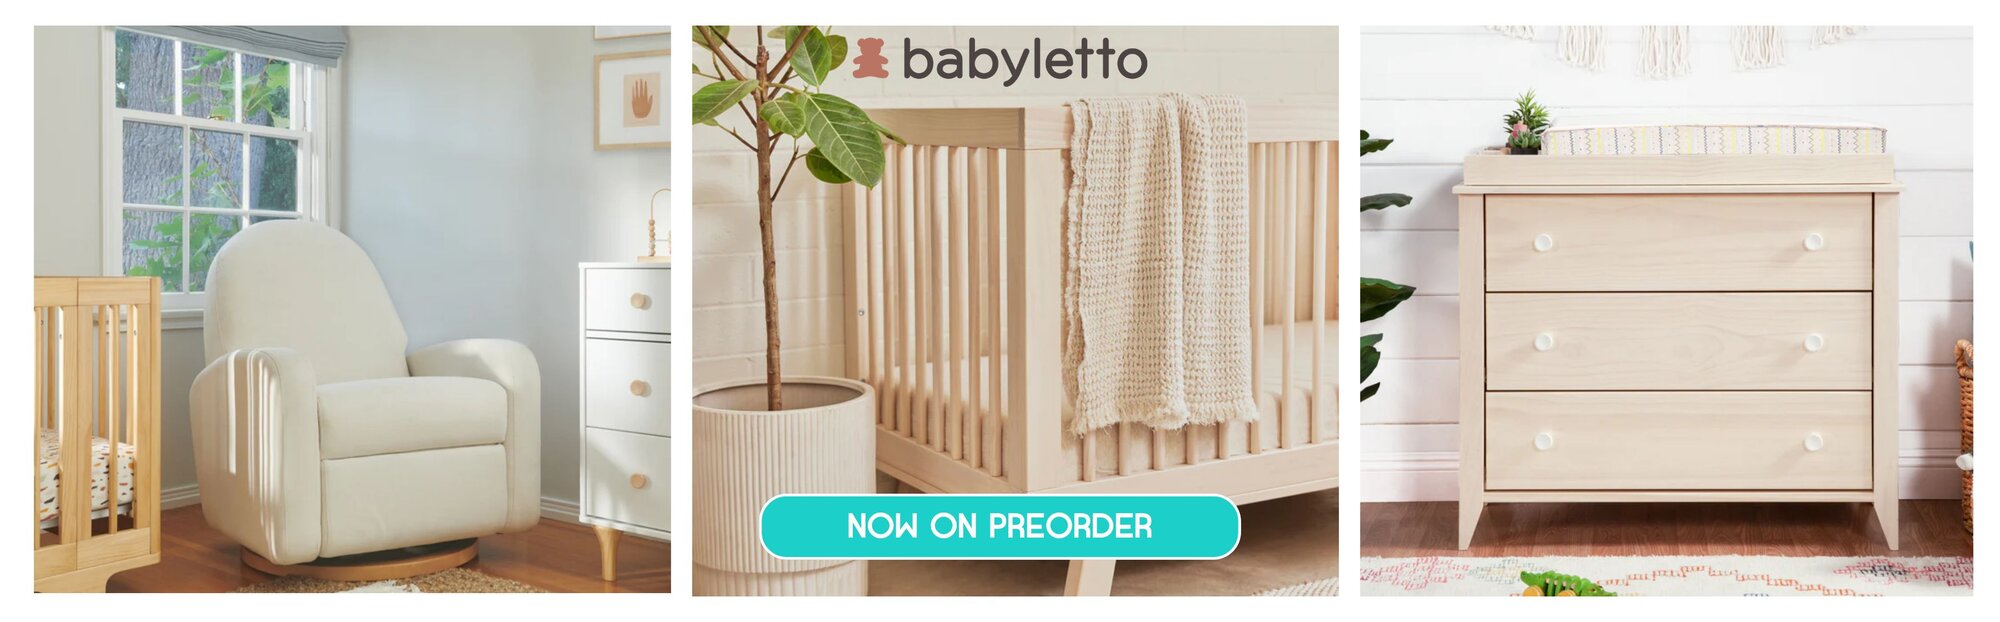 Babyletto: Now on PREORDER